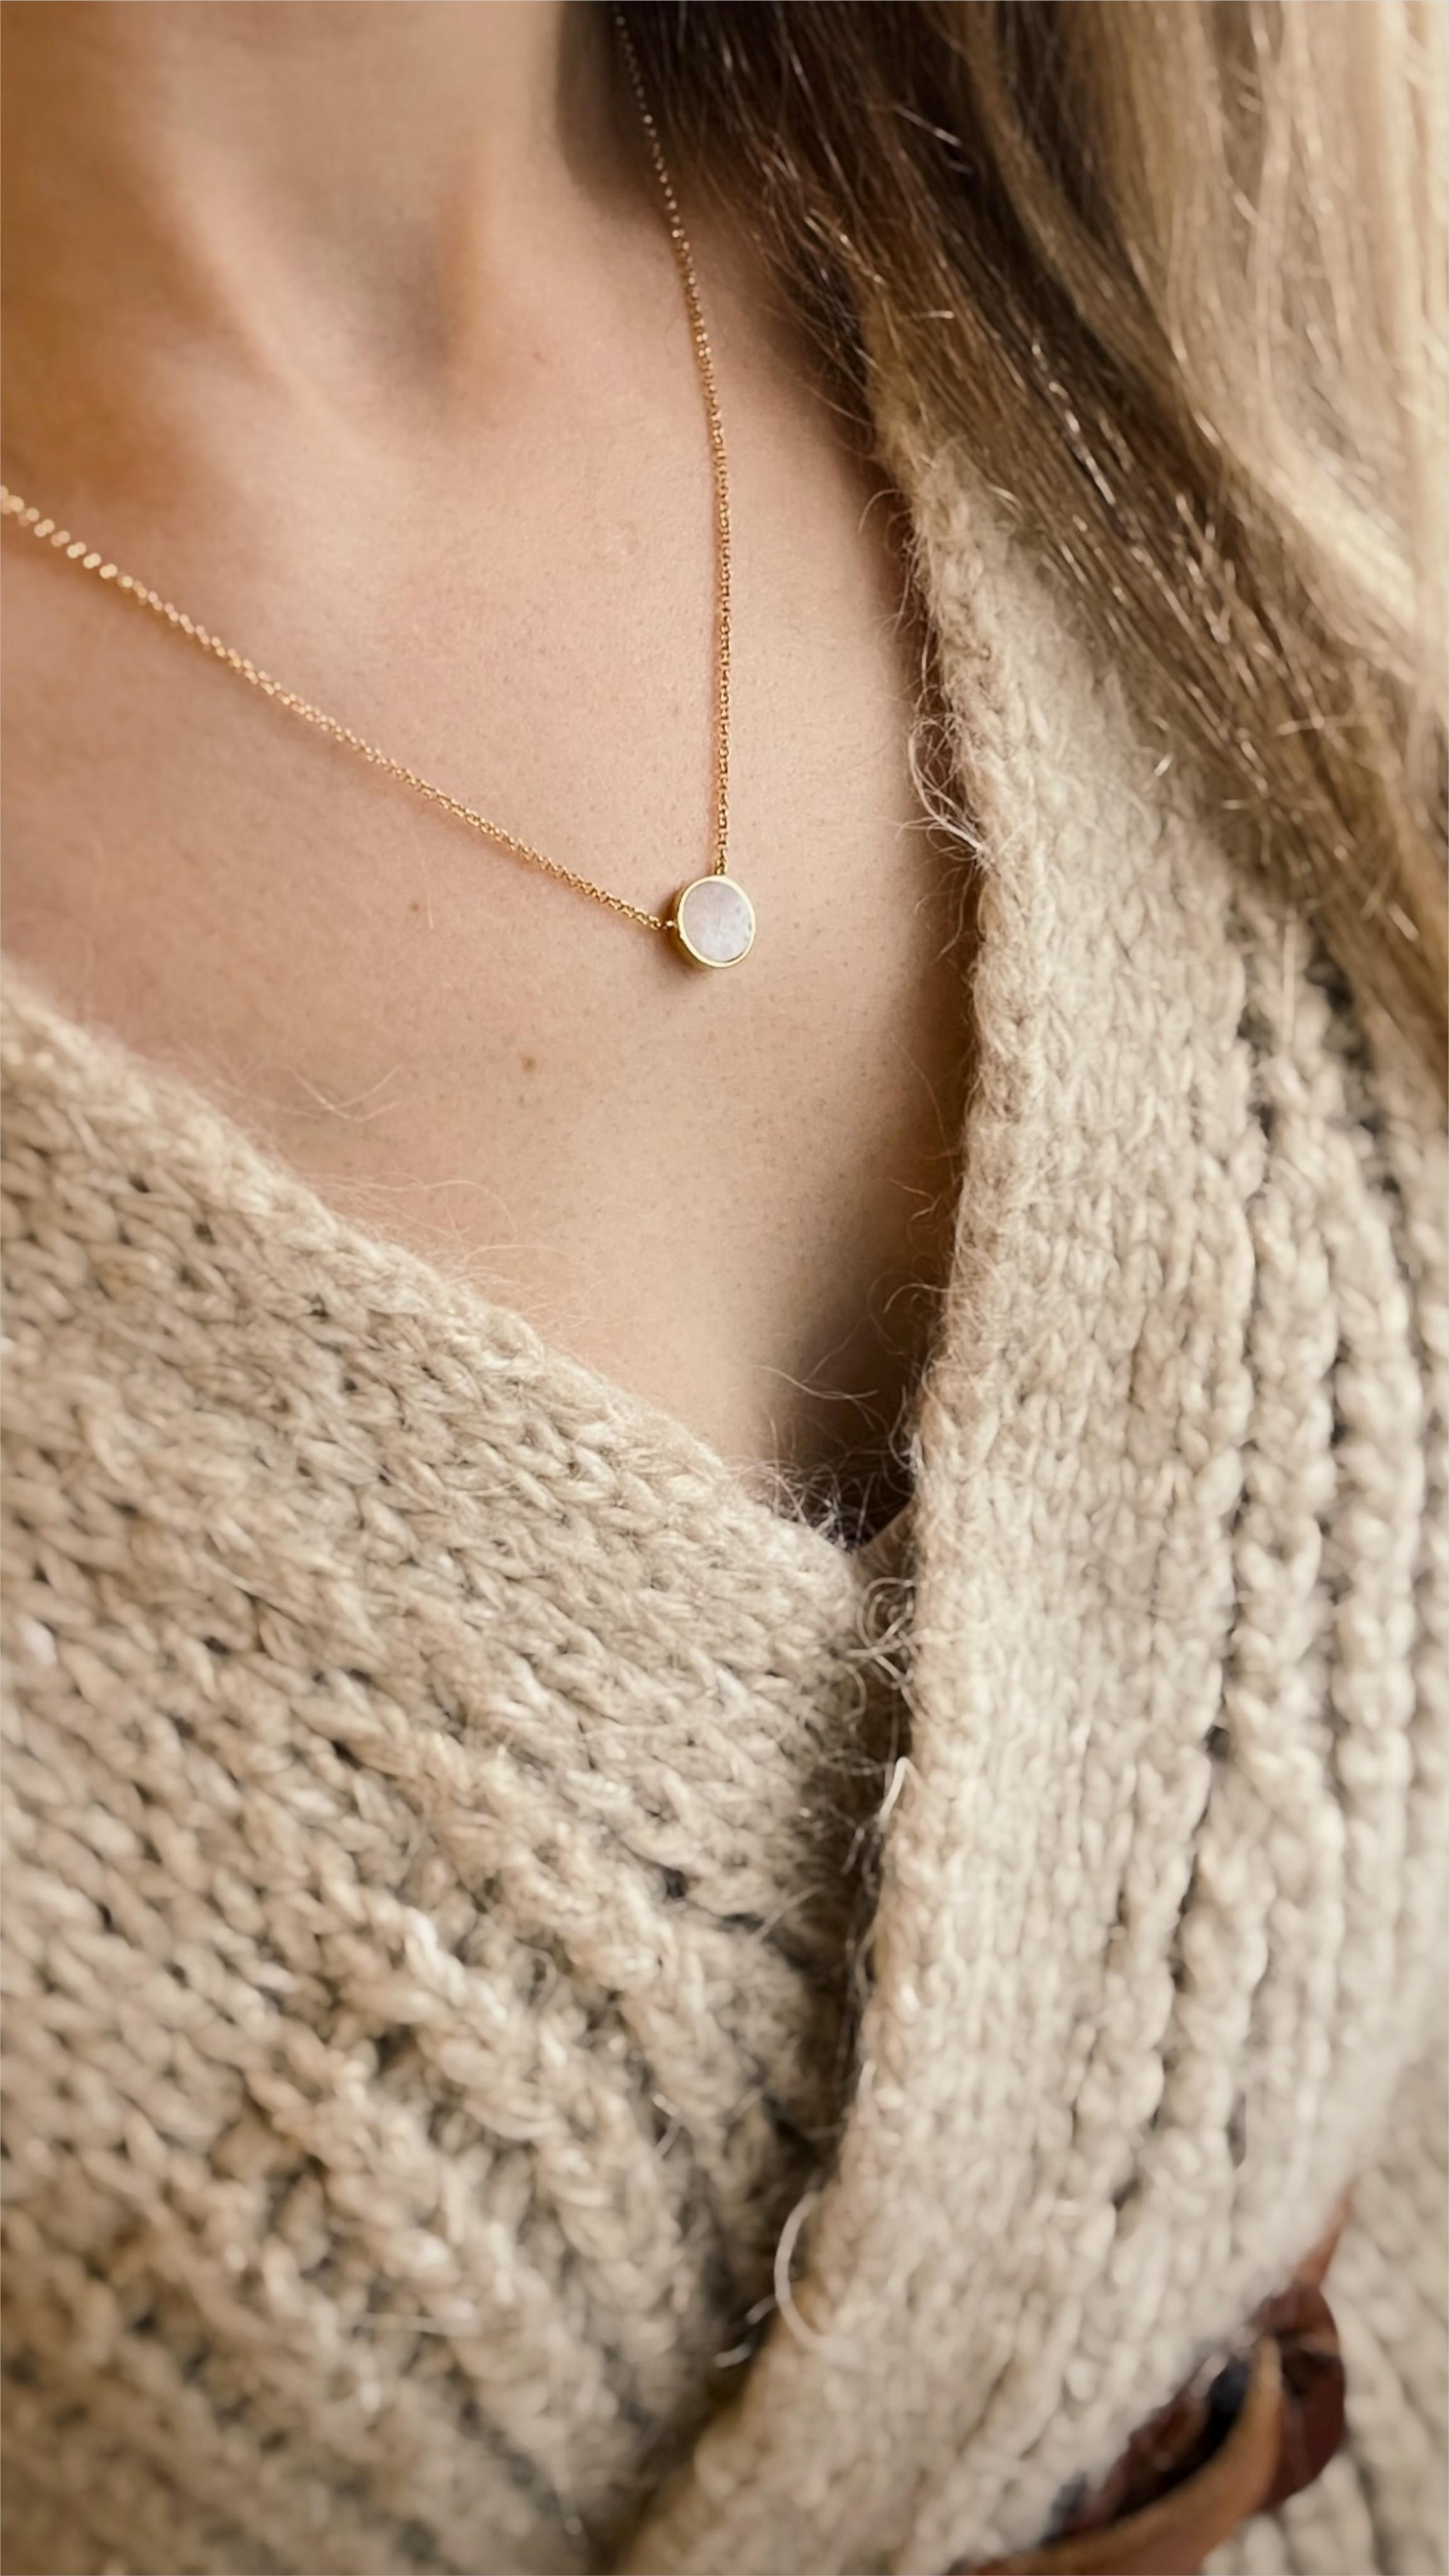 Our gold necklace with a white stone is made for you if you love timeless classics. It will be a beautiful complement to both your minimalist and chic outfits. Maybe you are looking for jewellery to add an extra touch to your wedding look? This